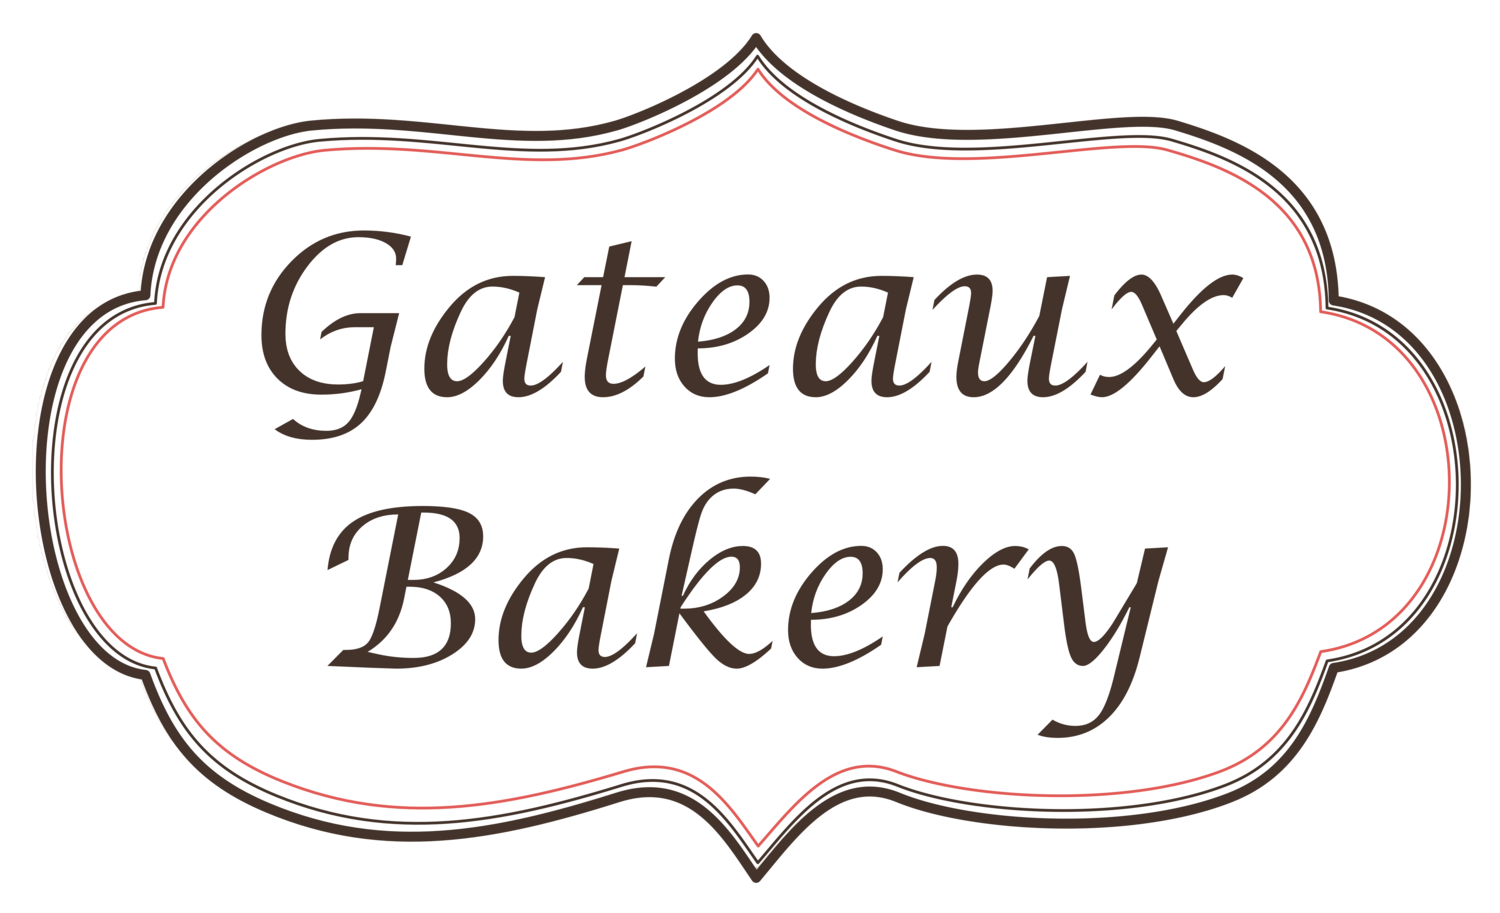 france clipart patisserie french